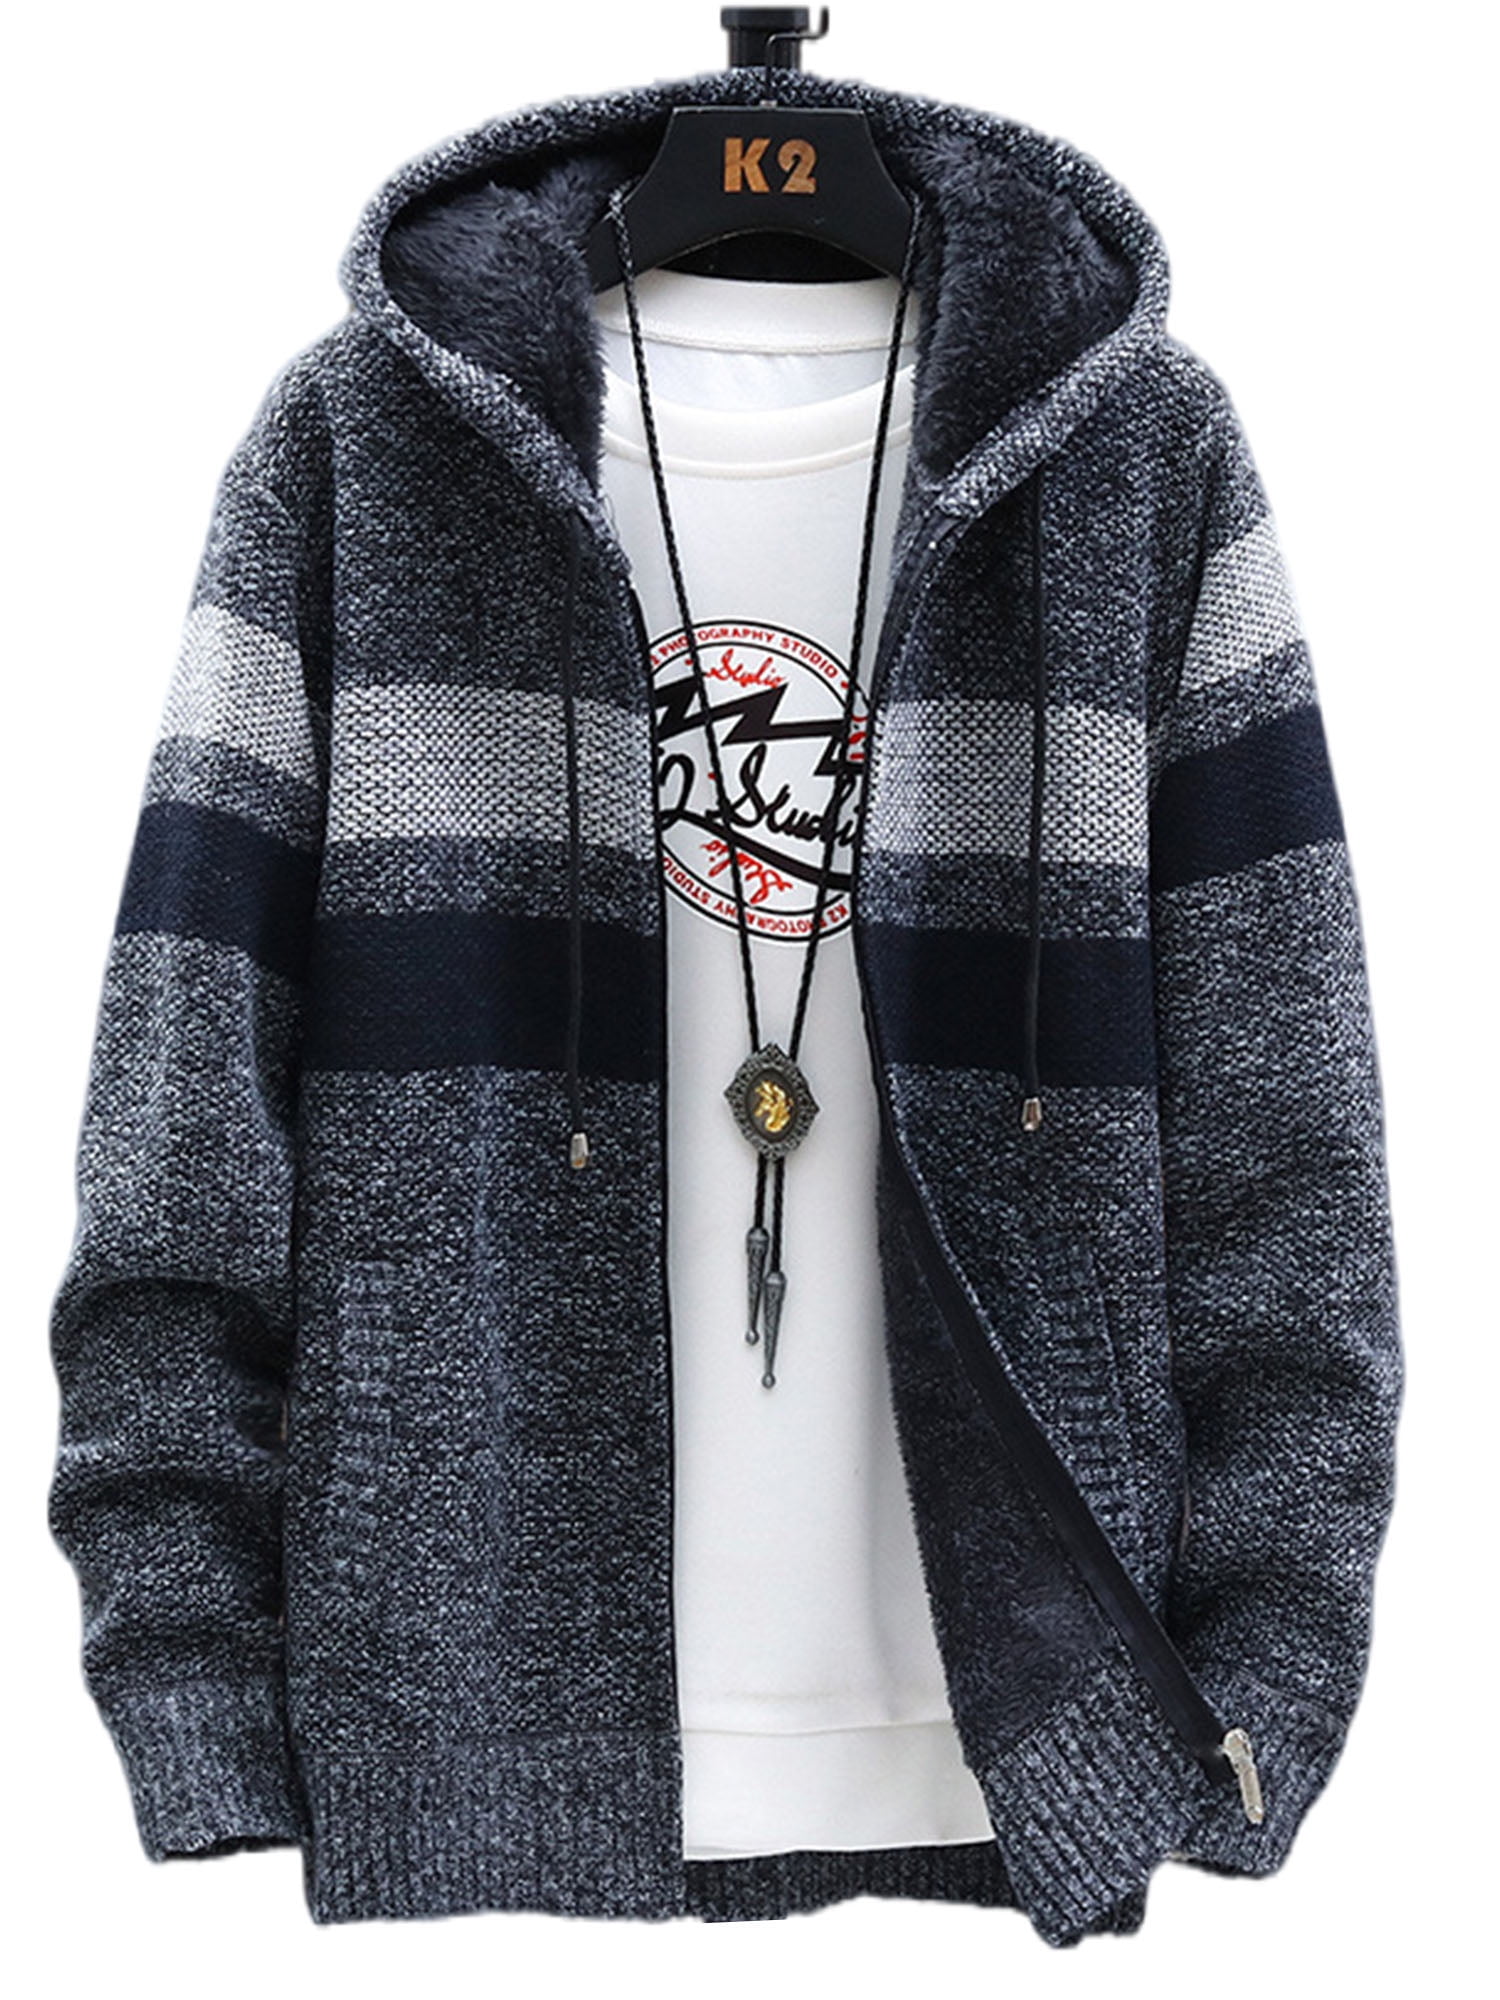 Versatile and Practical Men's Hoodies with Polyester Material for ...